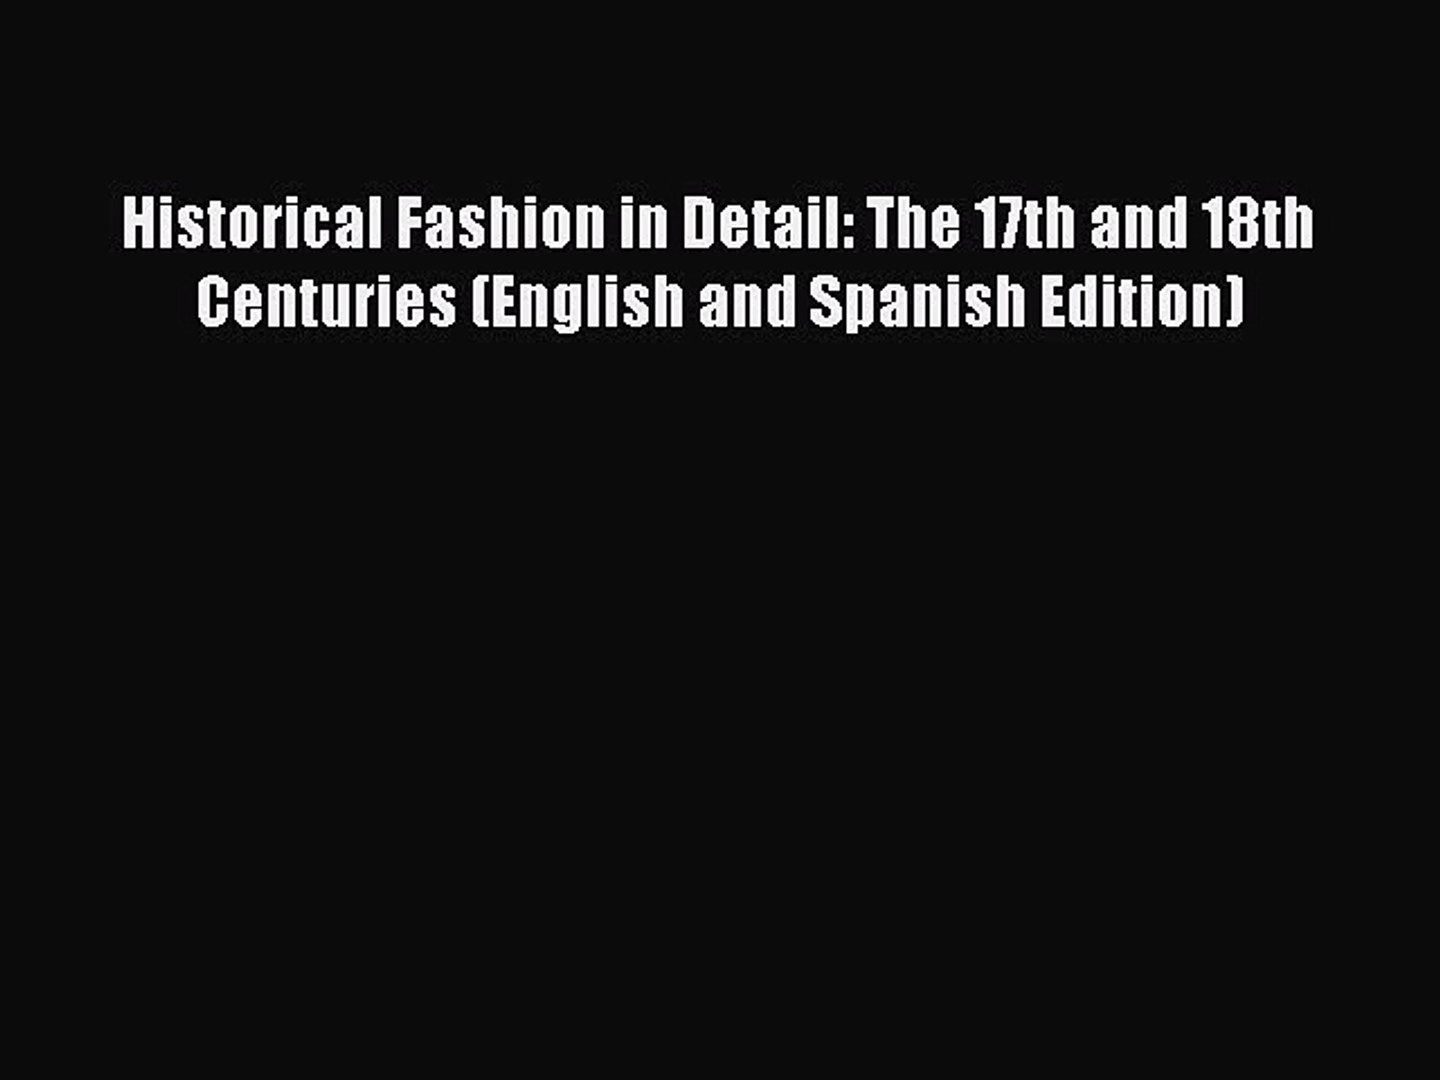 Download Historical Fashion in Detail: The 17th and 18th Centuries (English and Spanish Edition)